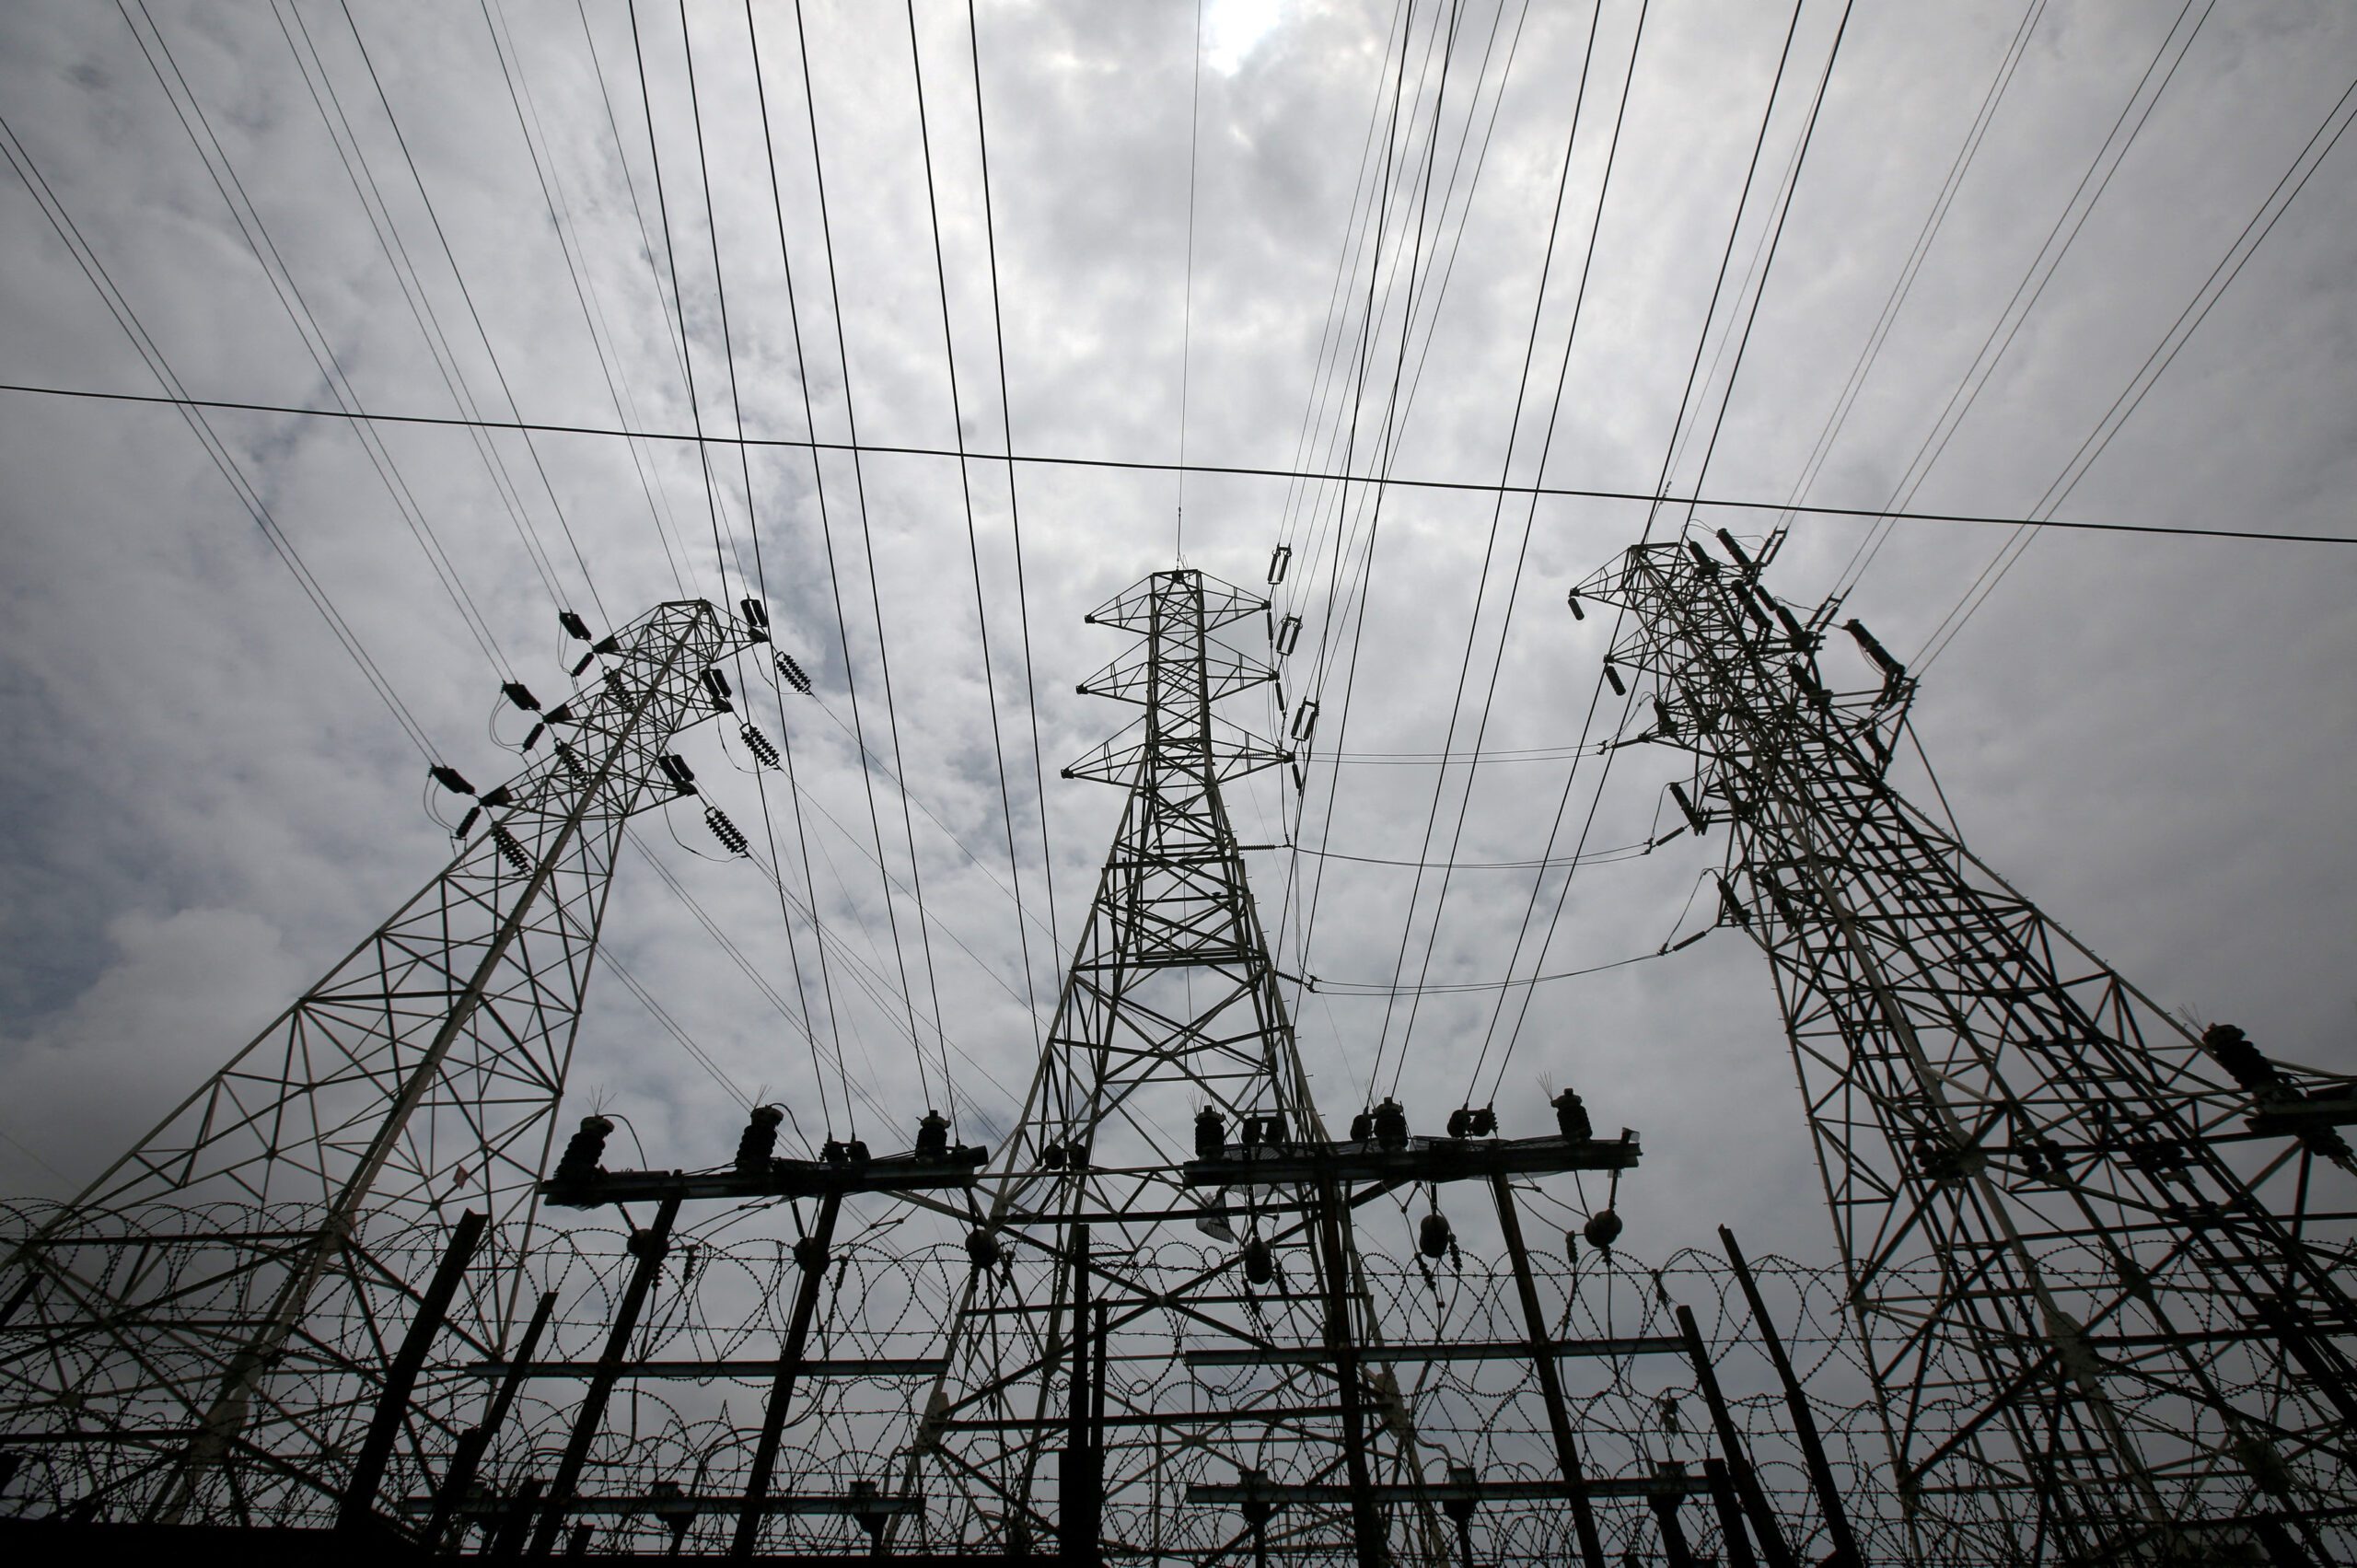 FILE PHOTO: High-tension power lines are pictured outside a Tata Power sub station in the suburbs of Mumbai, India, August 8, 2017. REUTERS/Shailesh Andrade/File Photo